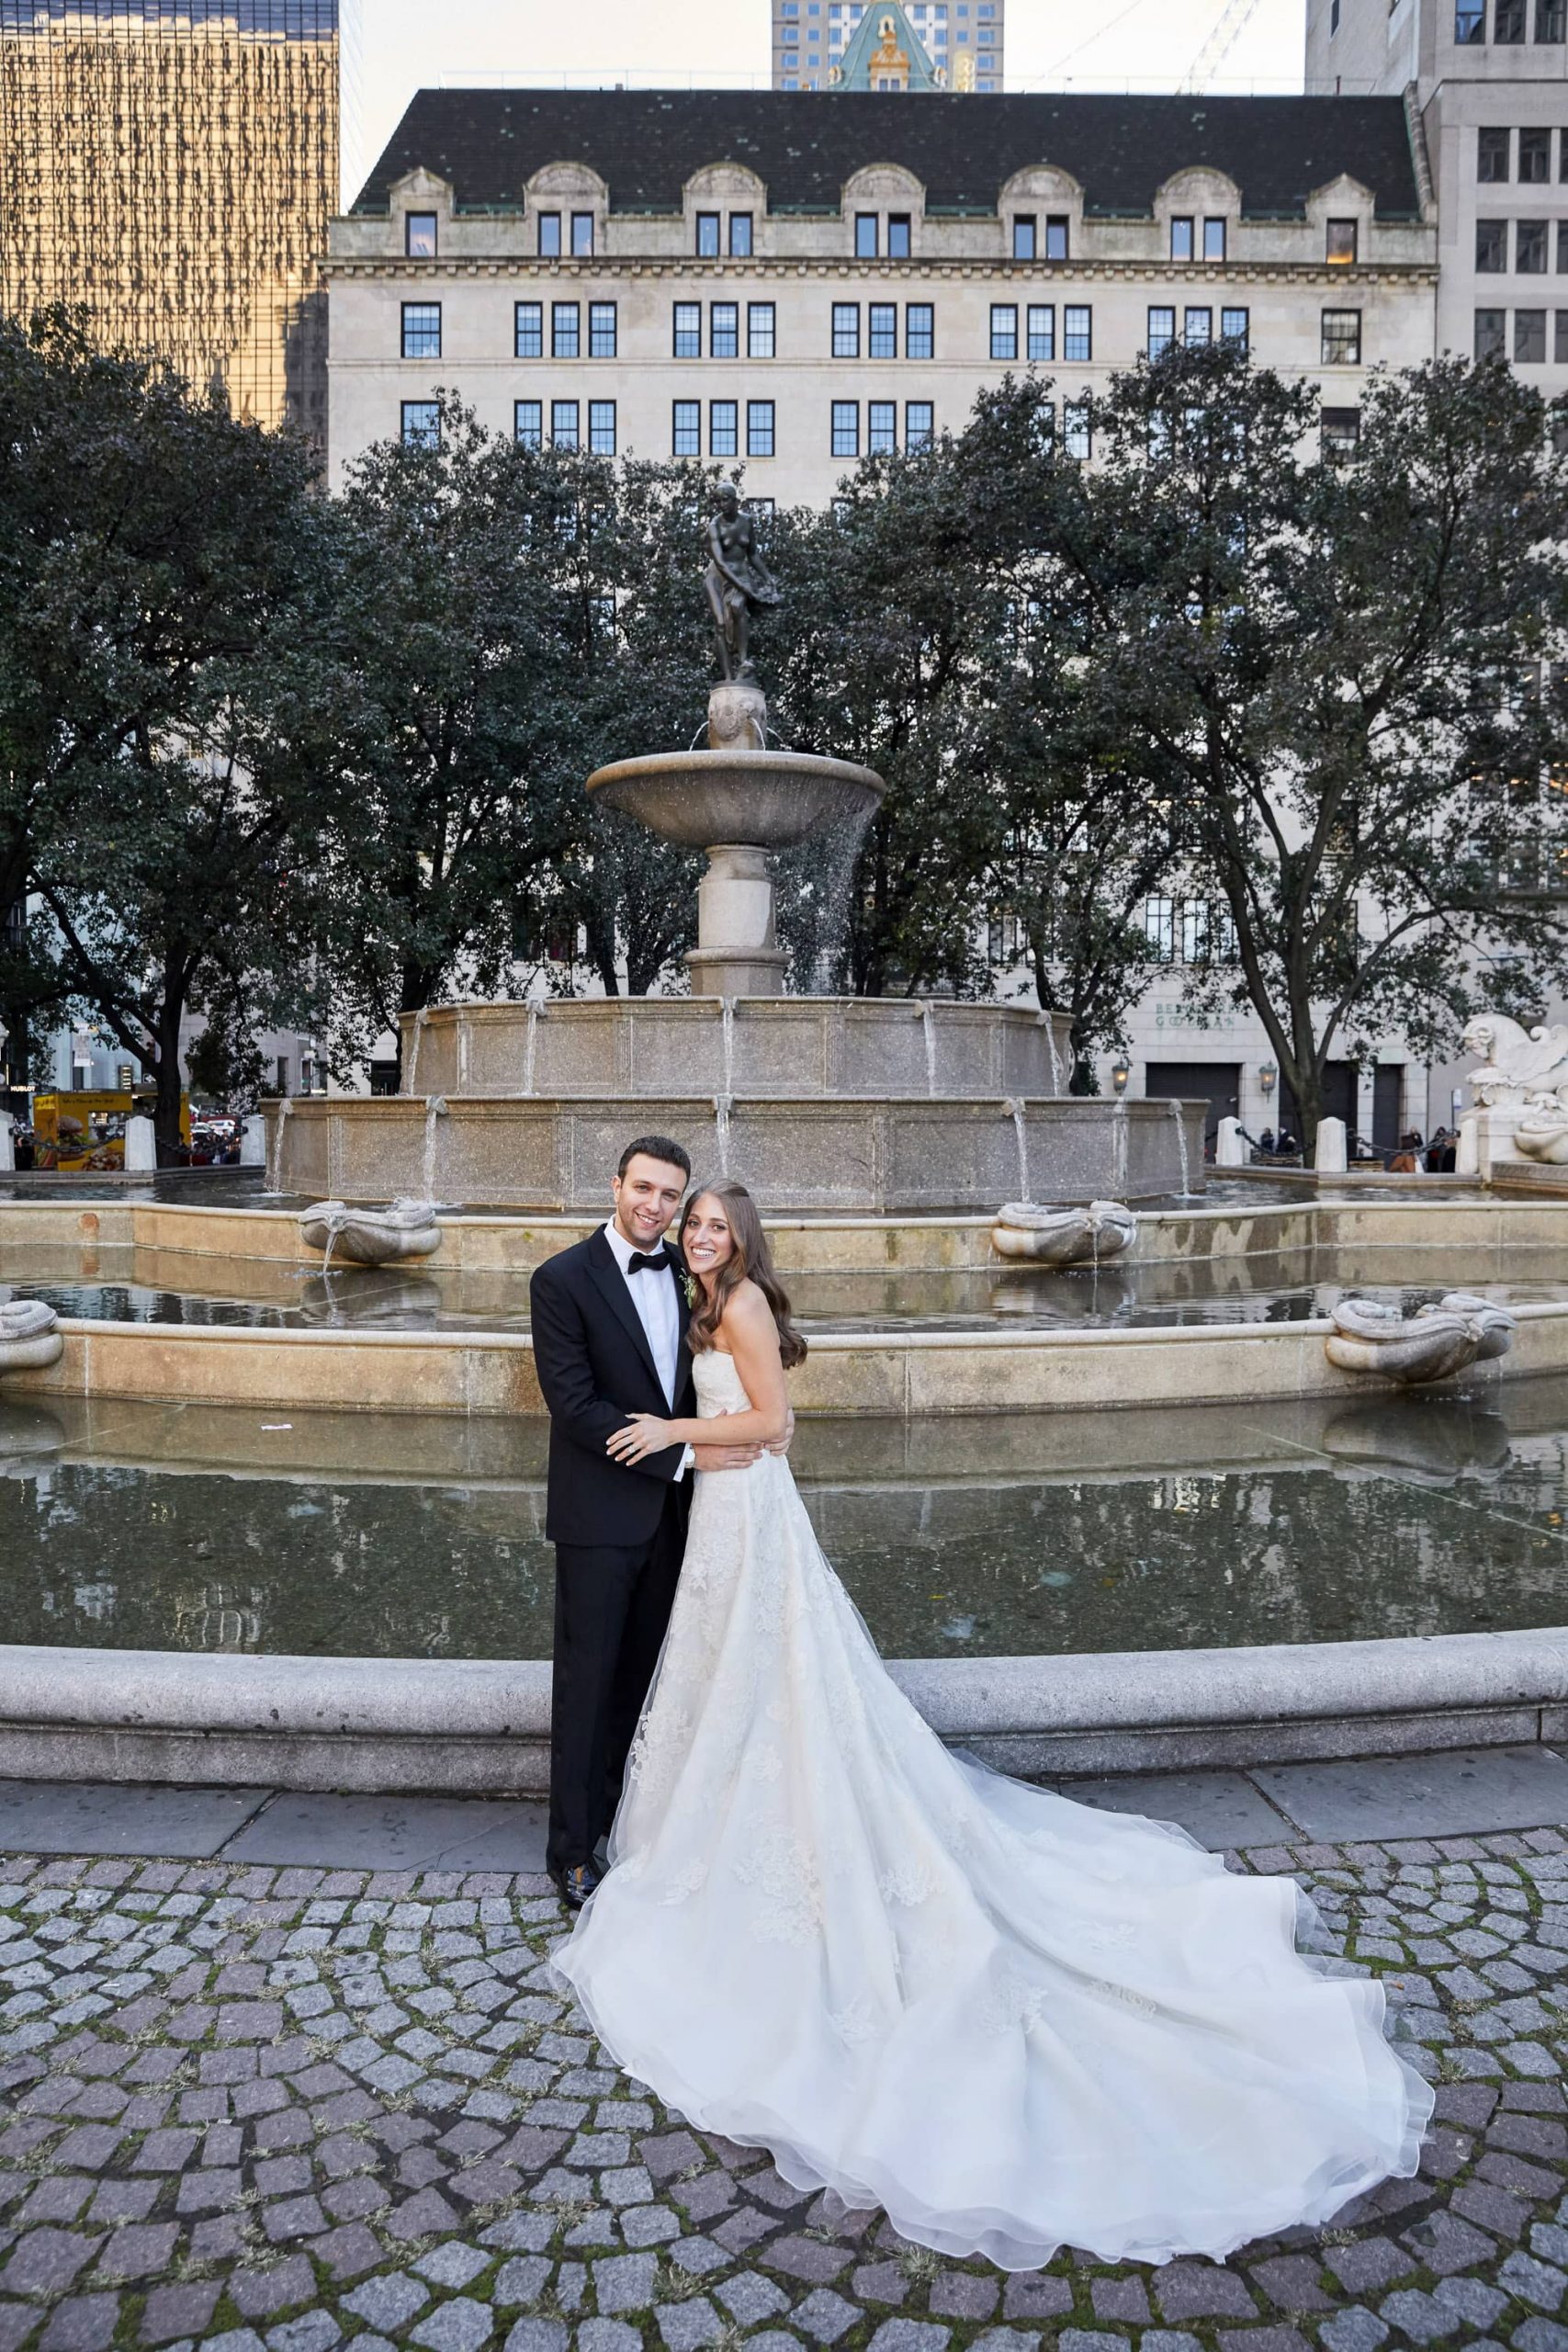 Bride and groom at this classic autumn wedding at The Plaza in NYC | Photo by Christian Oth Studio